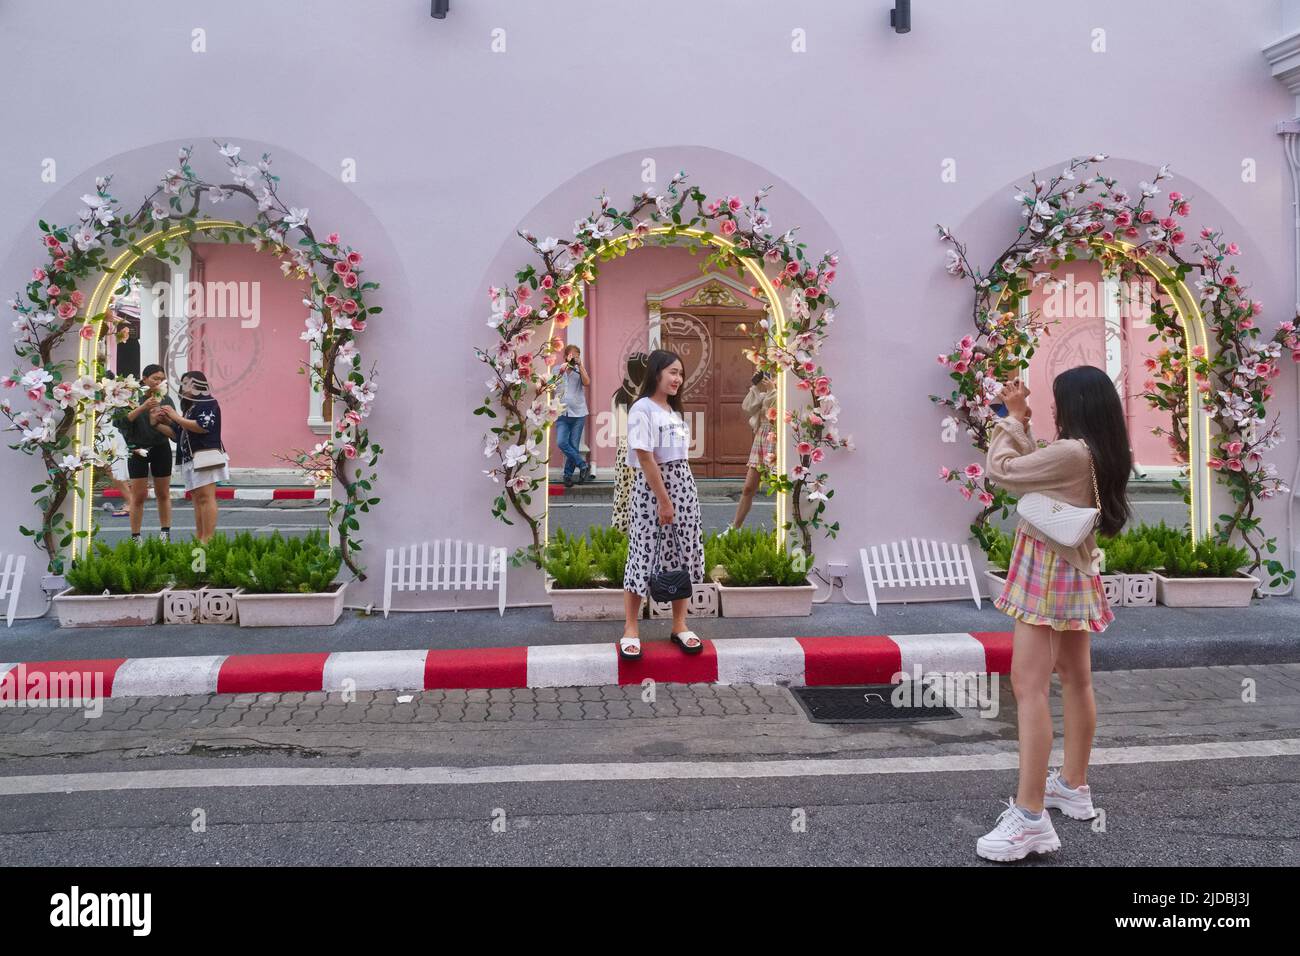 Tourists take photos in front of the mirrored windows of Aung Ku Cafe in Soi Rommanee / Thalang Rd in the Old Town area of Phuket Town, Thailand Stock Photo